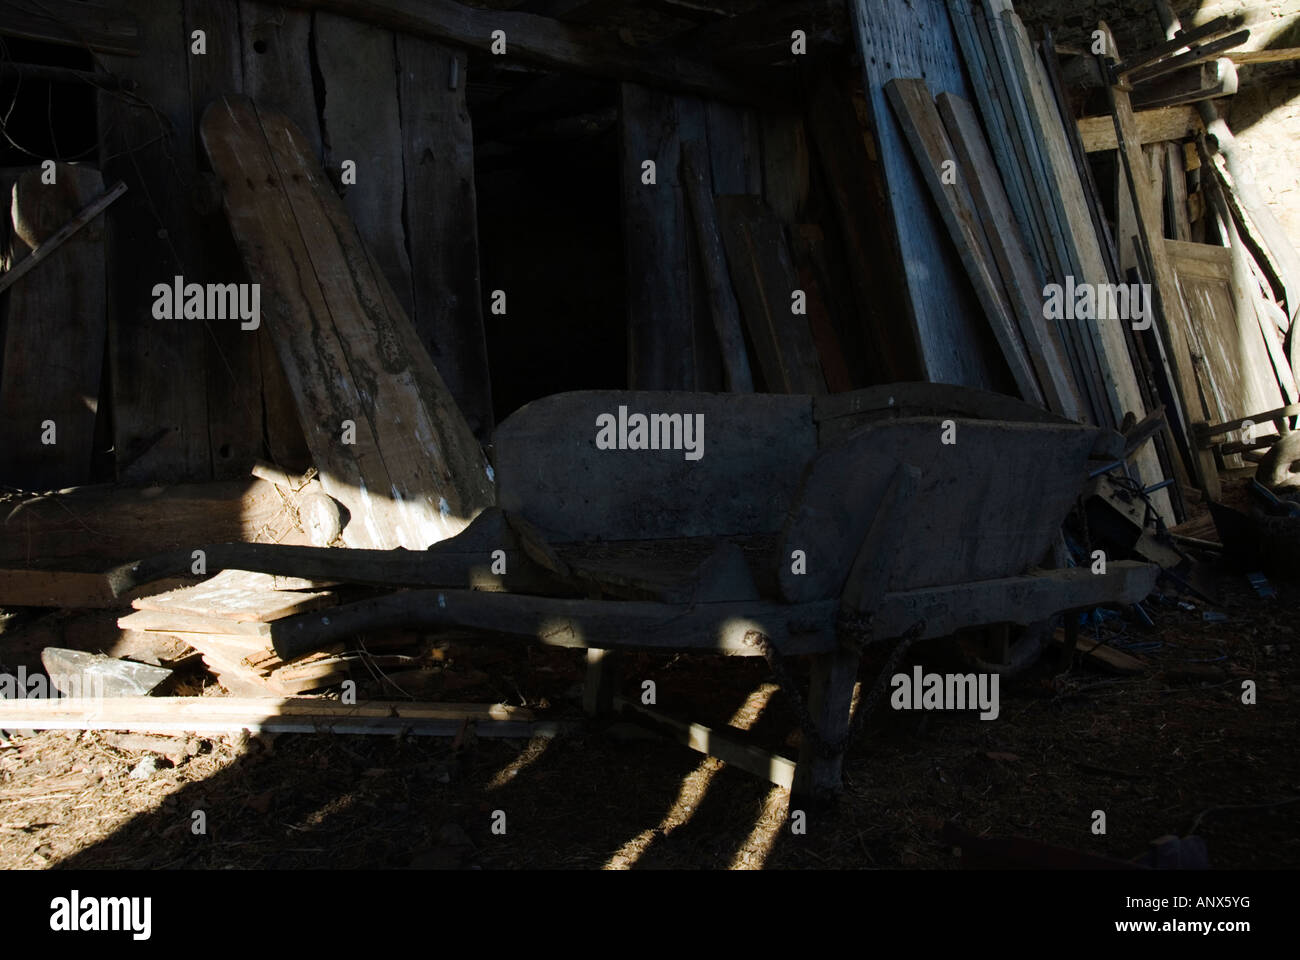 Stock Photo of an old wooden wheelbarrow abandoned inside an old french barn Stock Photo